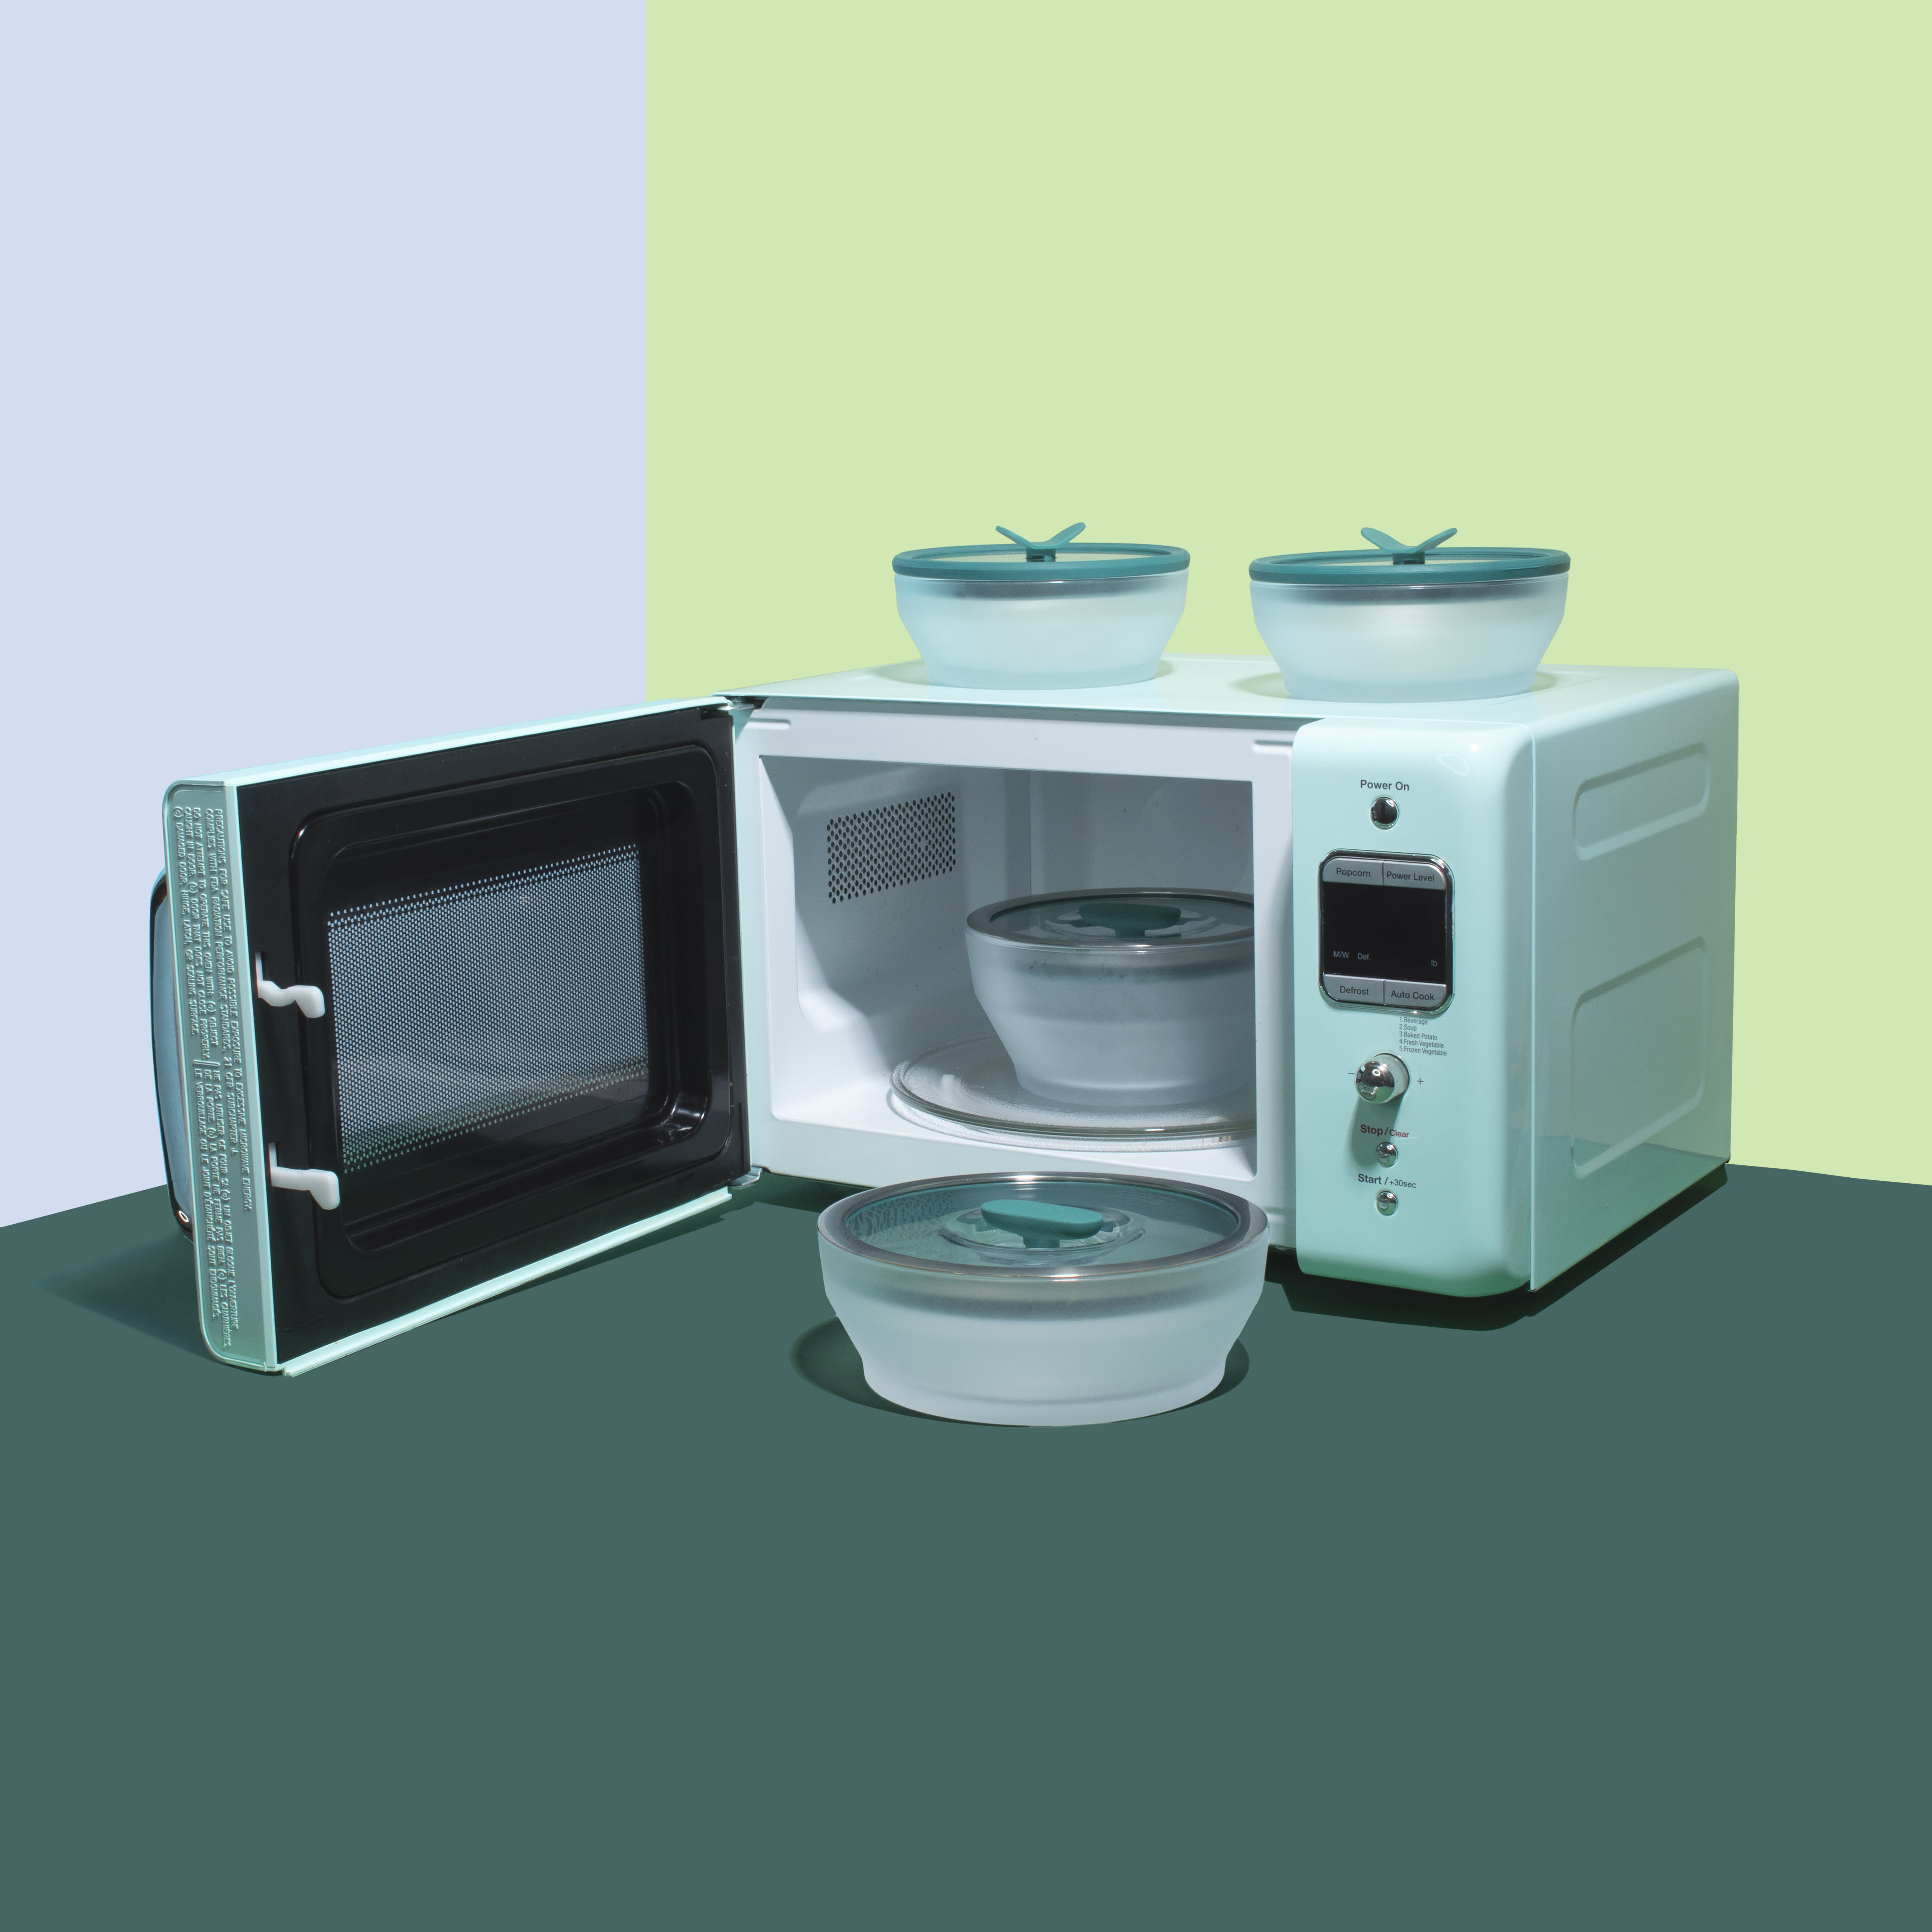 5 Tips for Picking a College Dorm Microwave - Daily Dream Decor